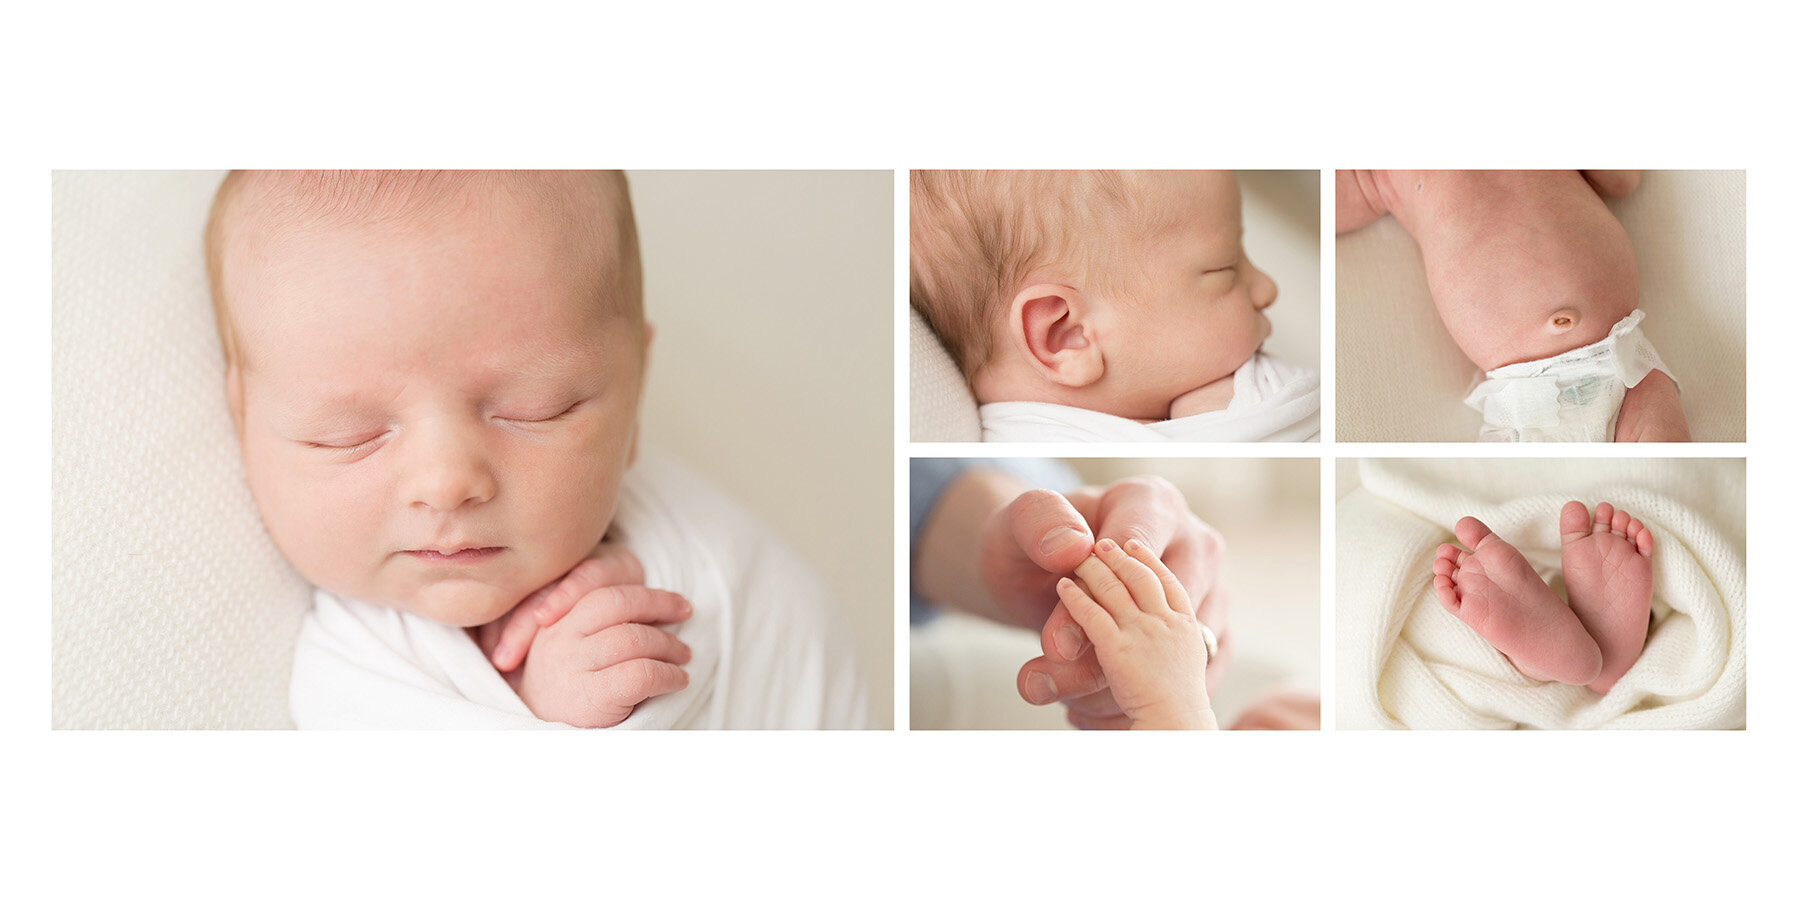 Parents love the albums created with detailed images from their baby’s newborn photos at our Louisville KY photography studio. The albums include upclose details like your baby’s hands, toes, profile. They are a favorite and perfect for remembering …